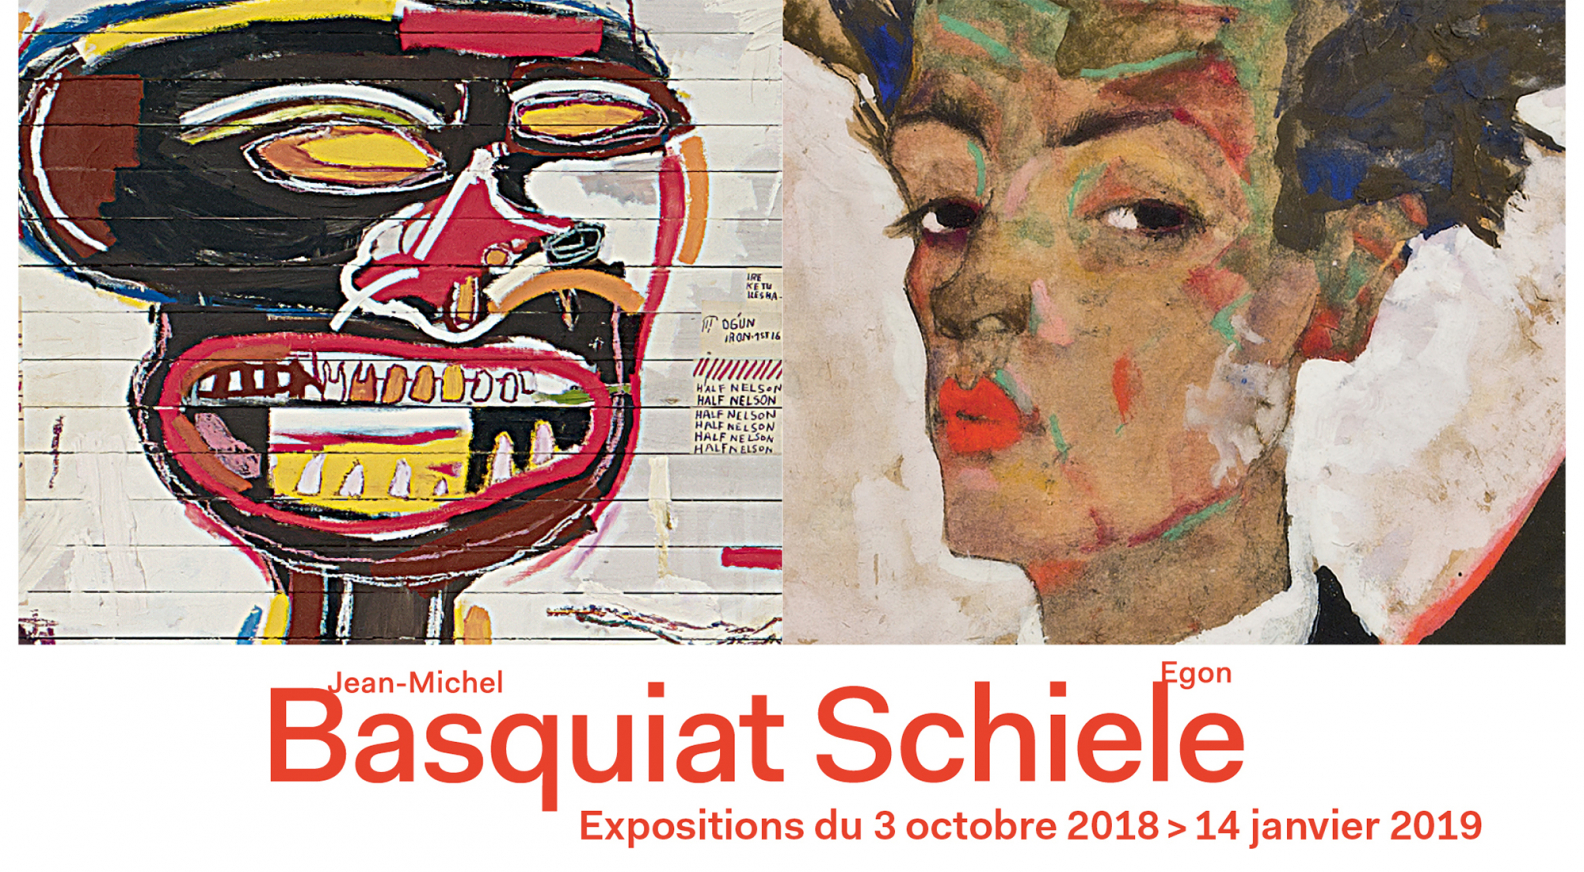 slag Kano generation Jean-Michel Basquiat – Egon Schiele”, an exceptional double exhibition at  the Fondation Louis Vuitton from October 3, 2018 - LVMH